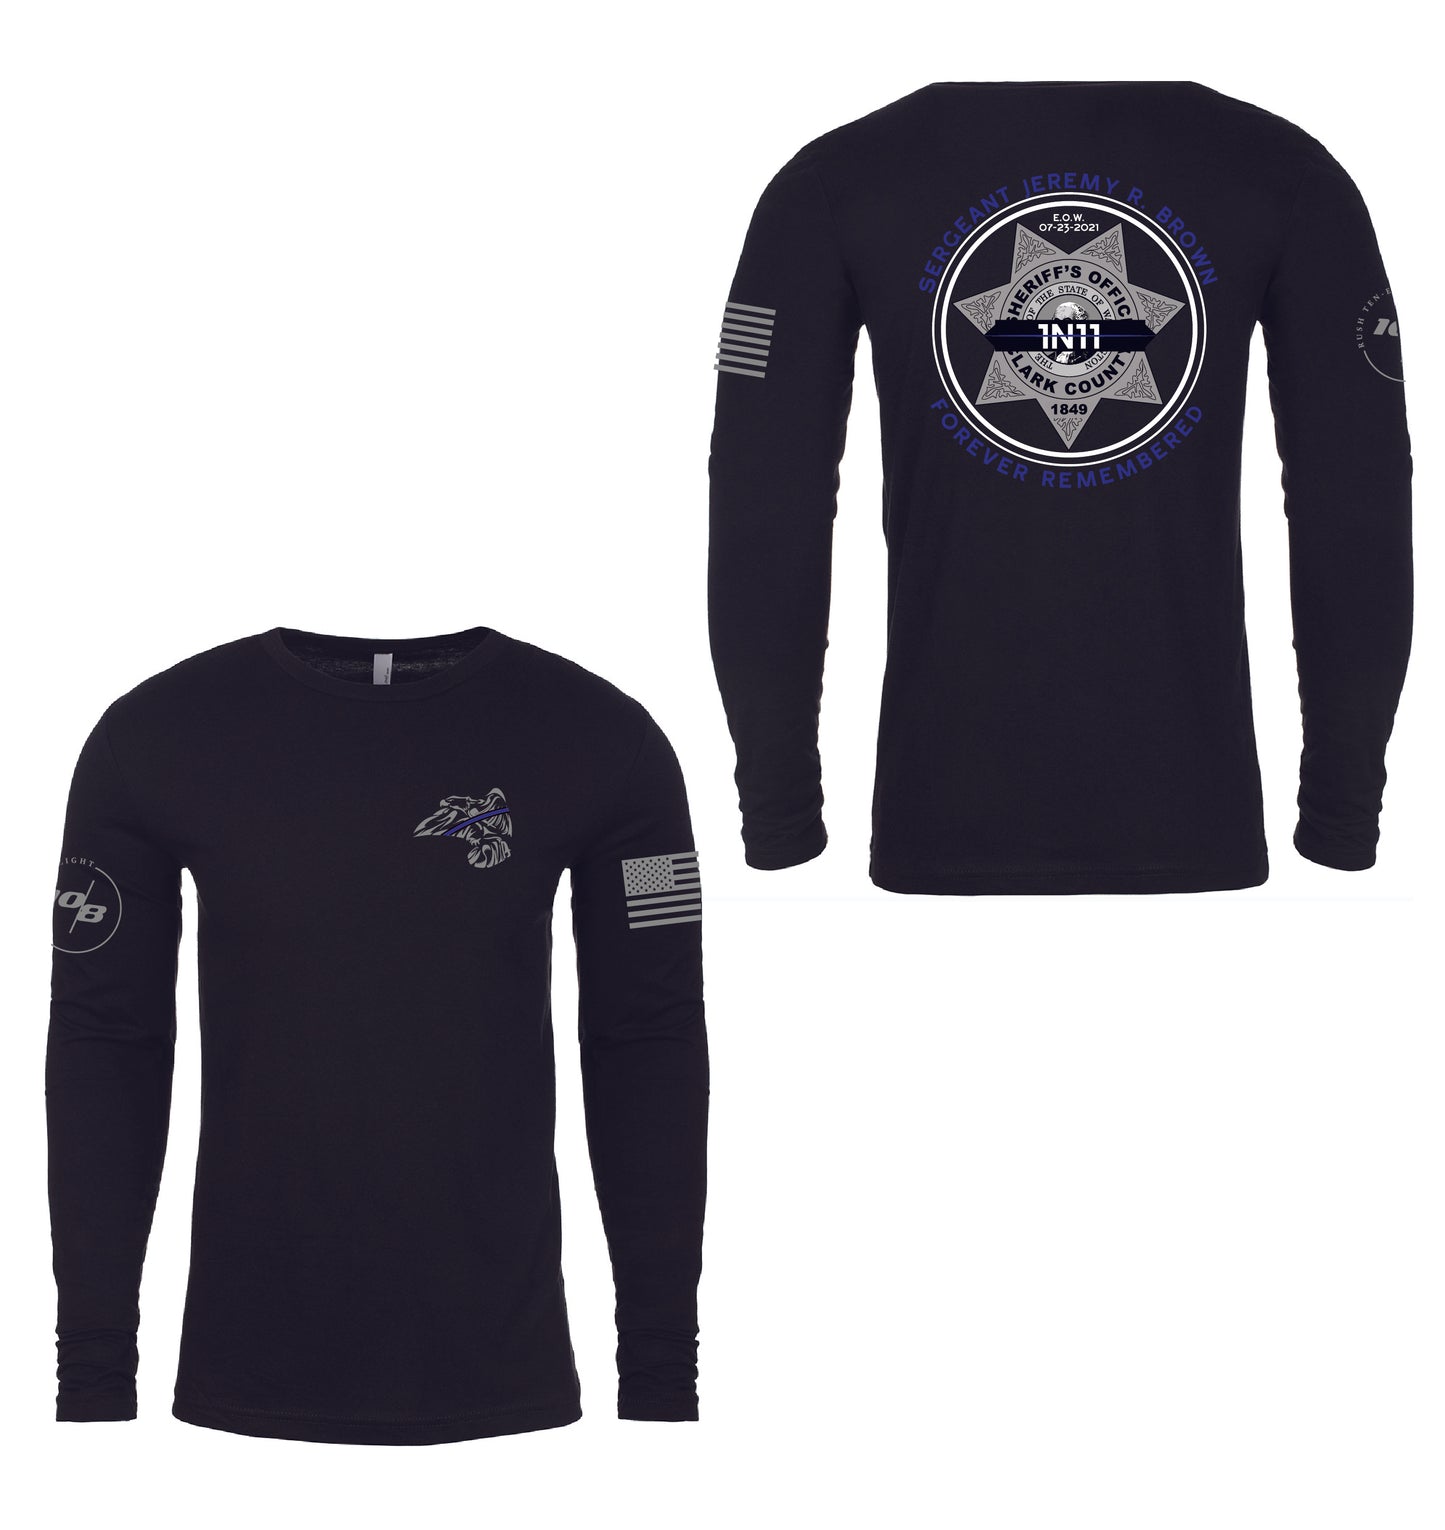 WSNIA SGT. JEREMY BROWN - FOREVER REMEMBERED MEMORIAL Men's Next Level Premium Fitted Long Sleeve CVC Crew Tee